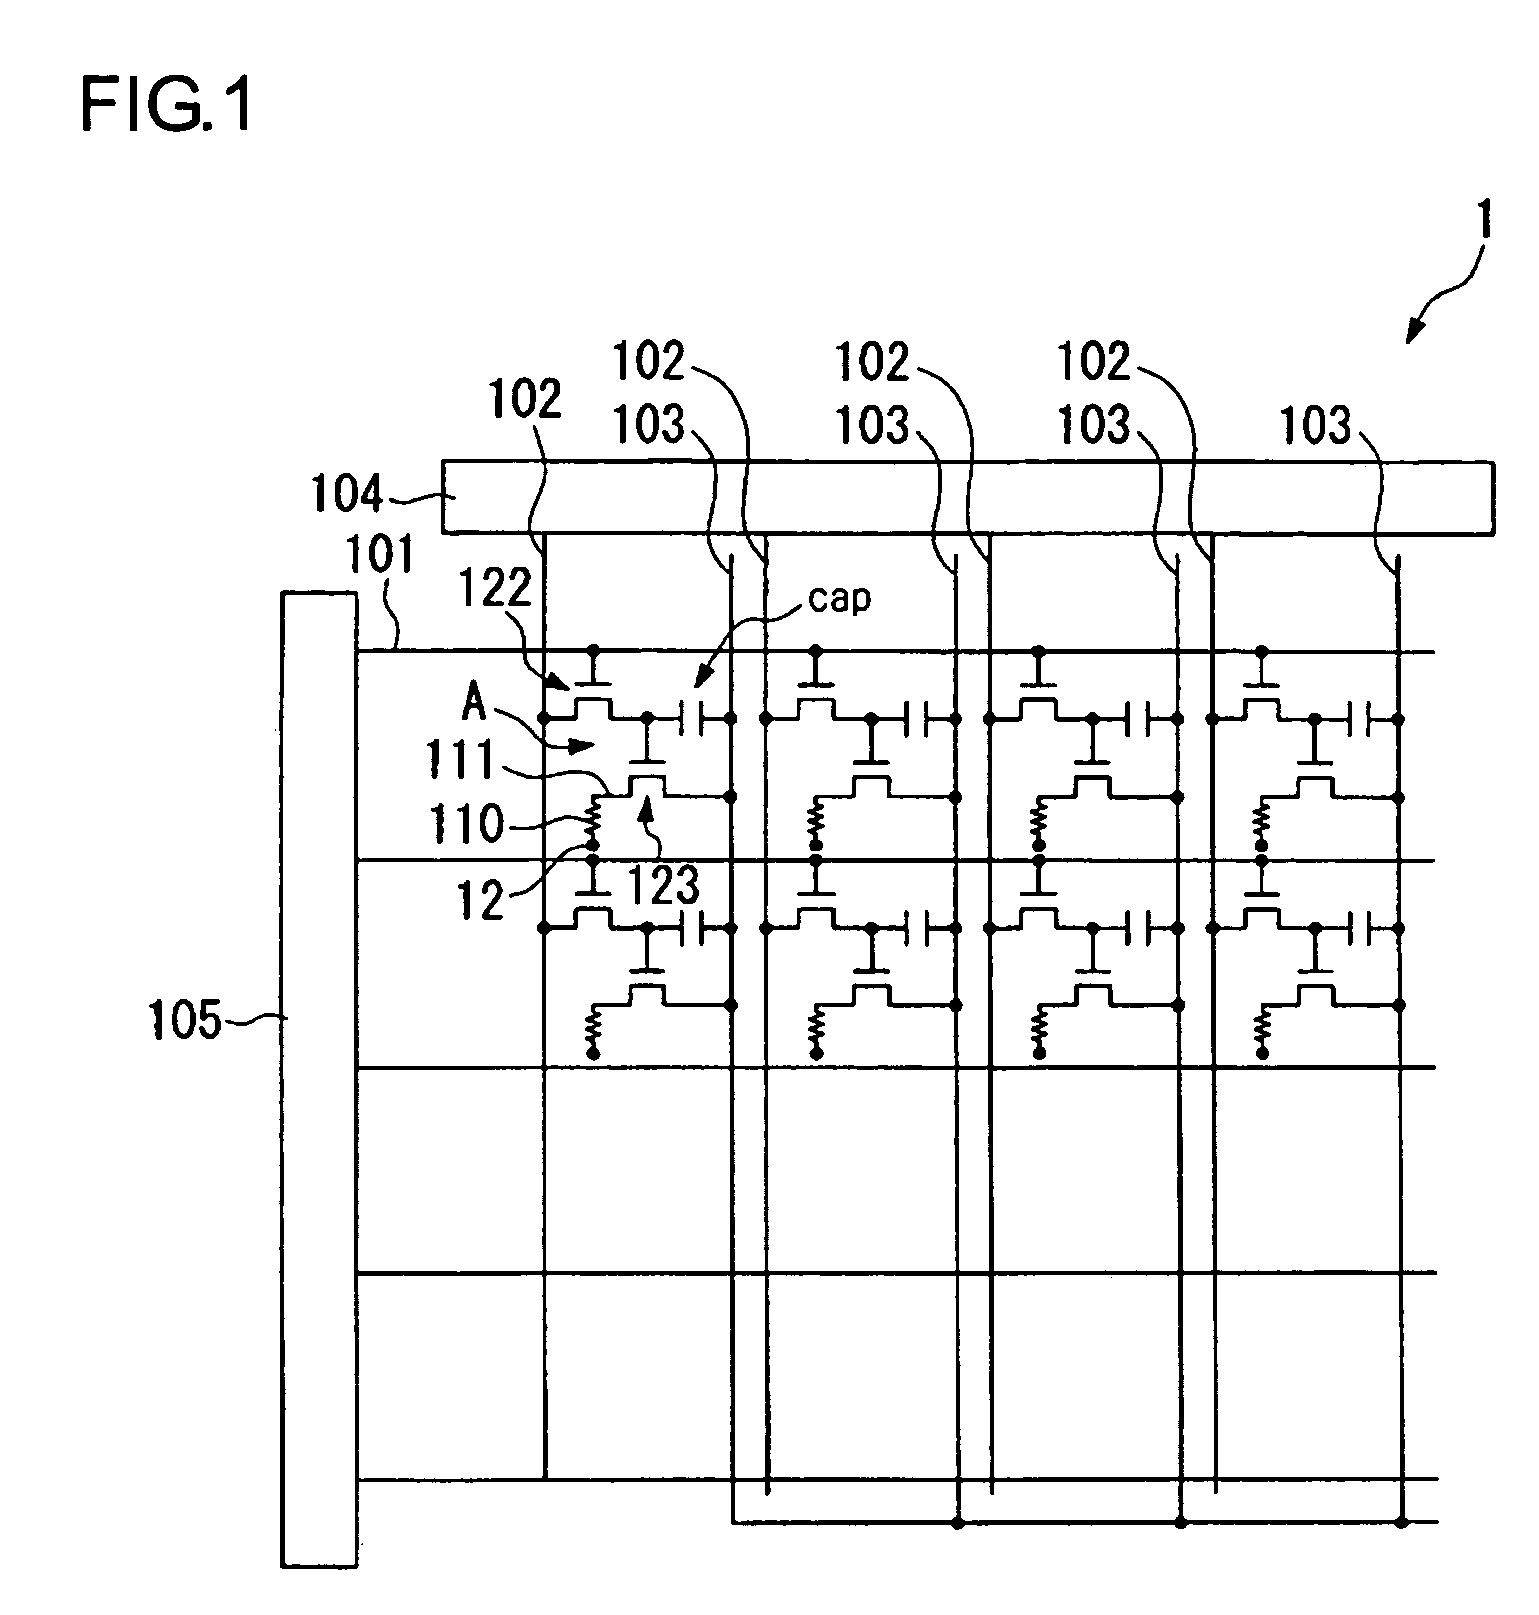 Organic electroluminescent device with HIL/HTL specific to each RGB pixel